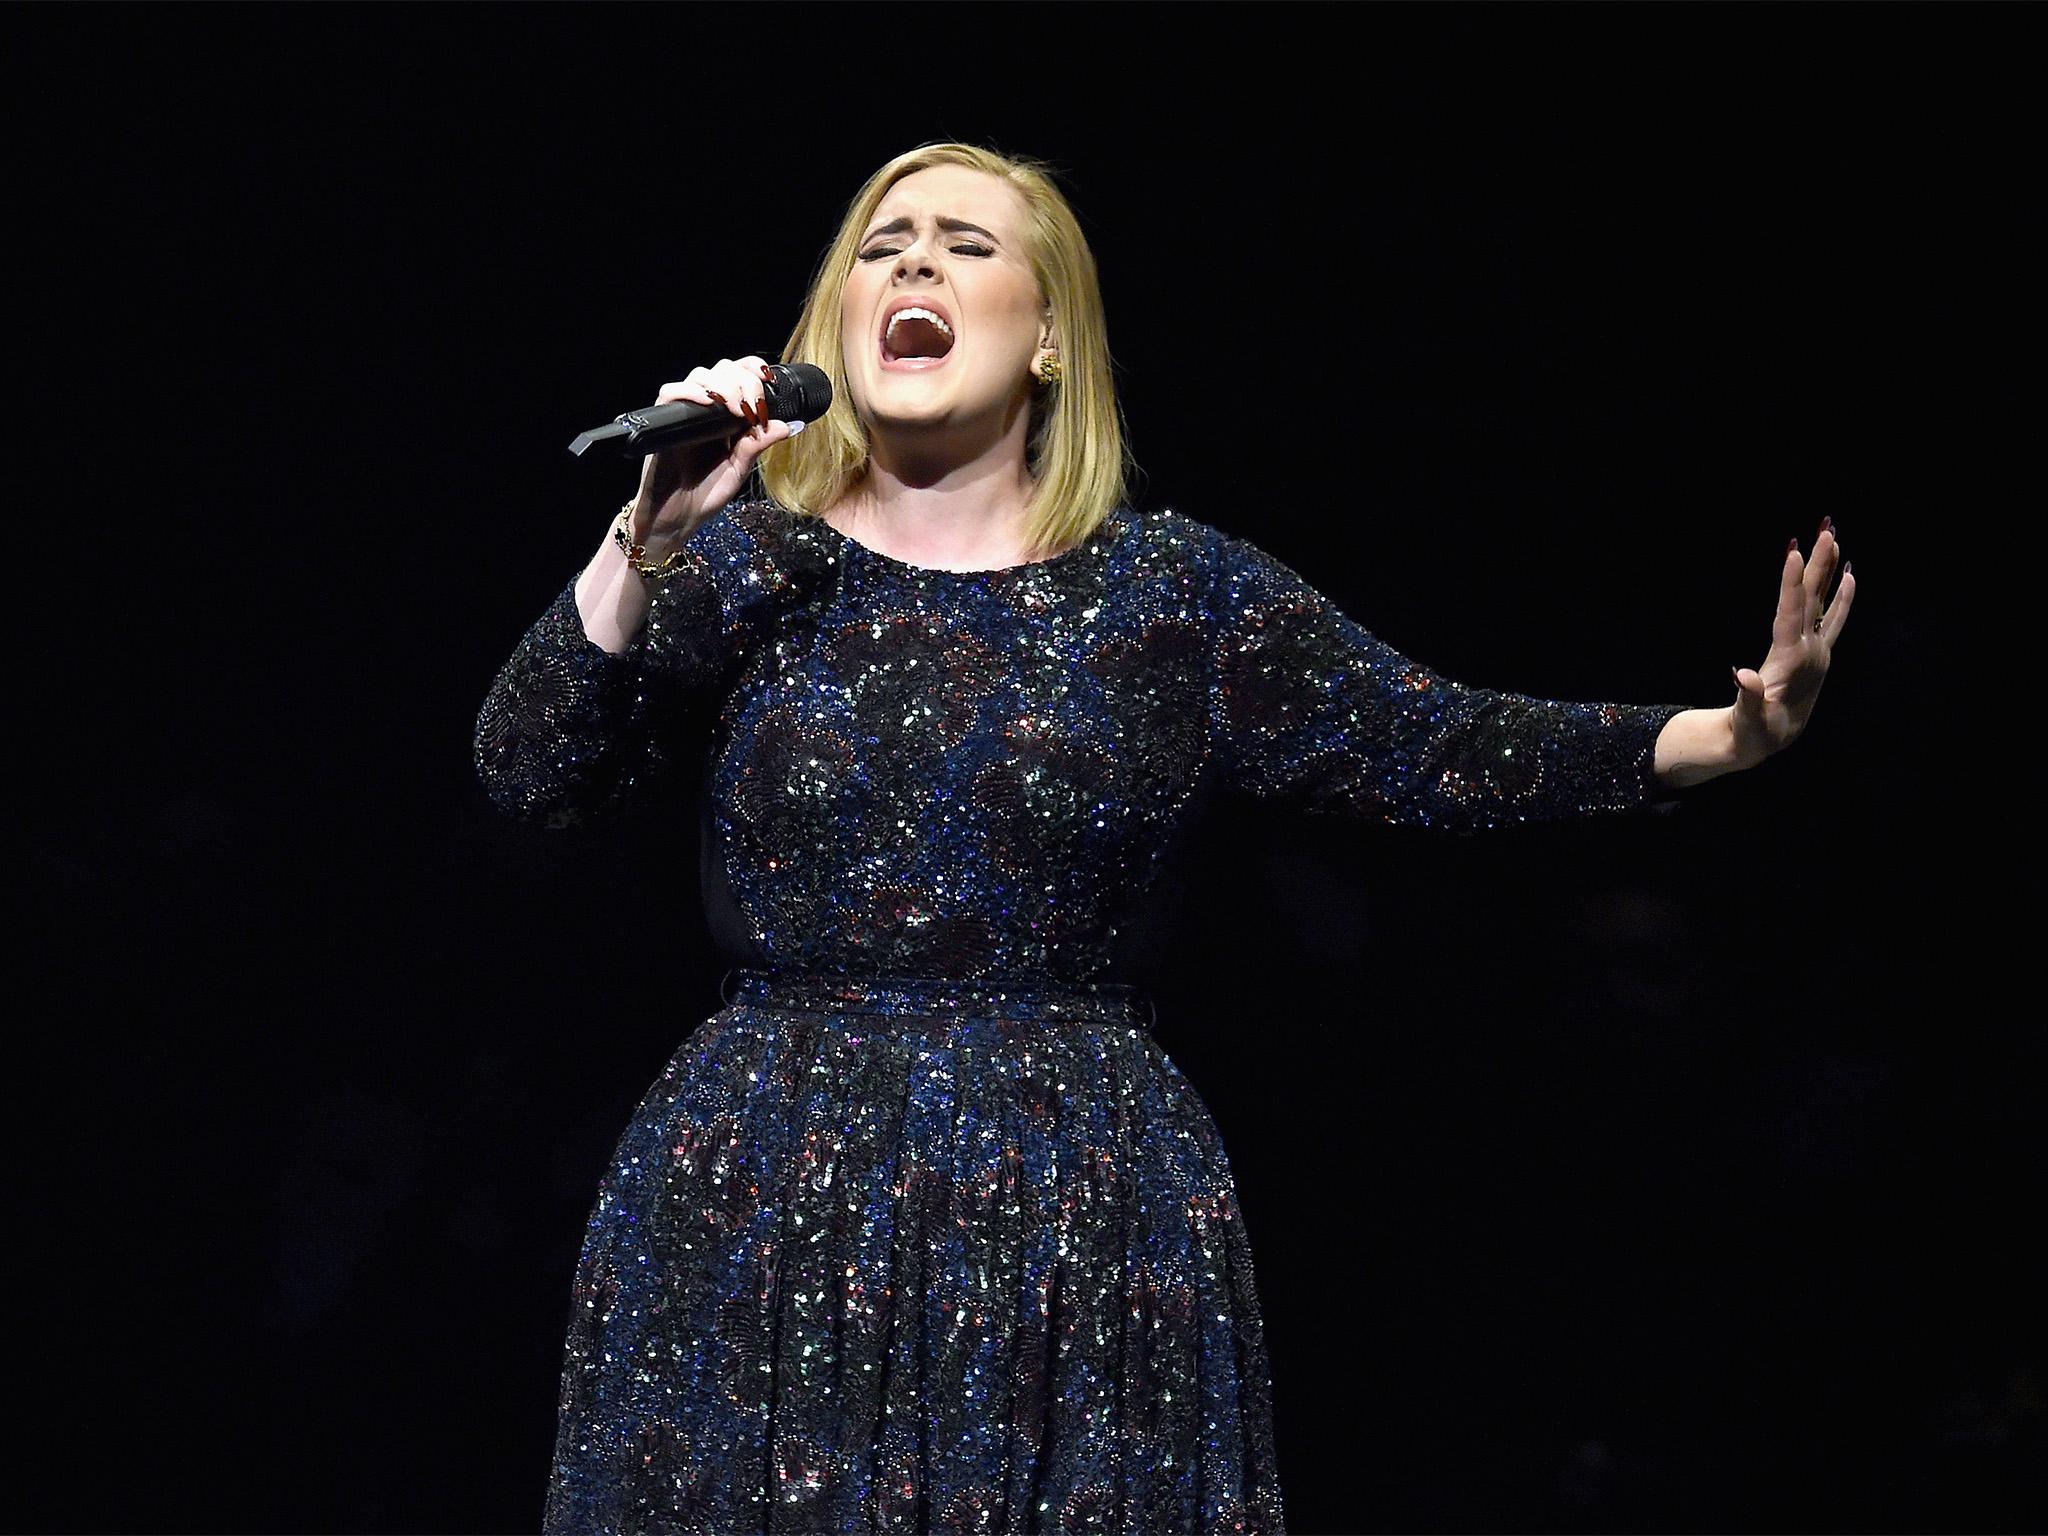 Adele reported that her voice pitch dropped dramatically after giving birth to her son in 2012